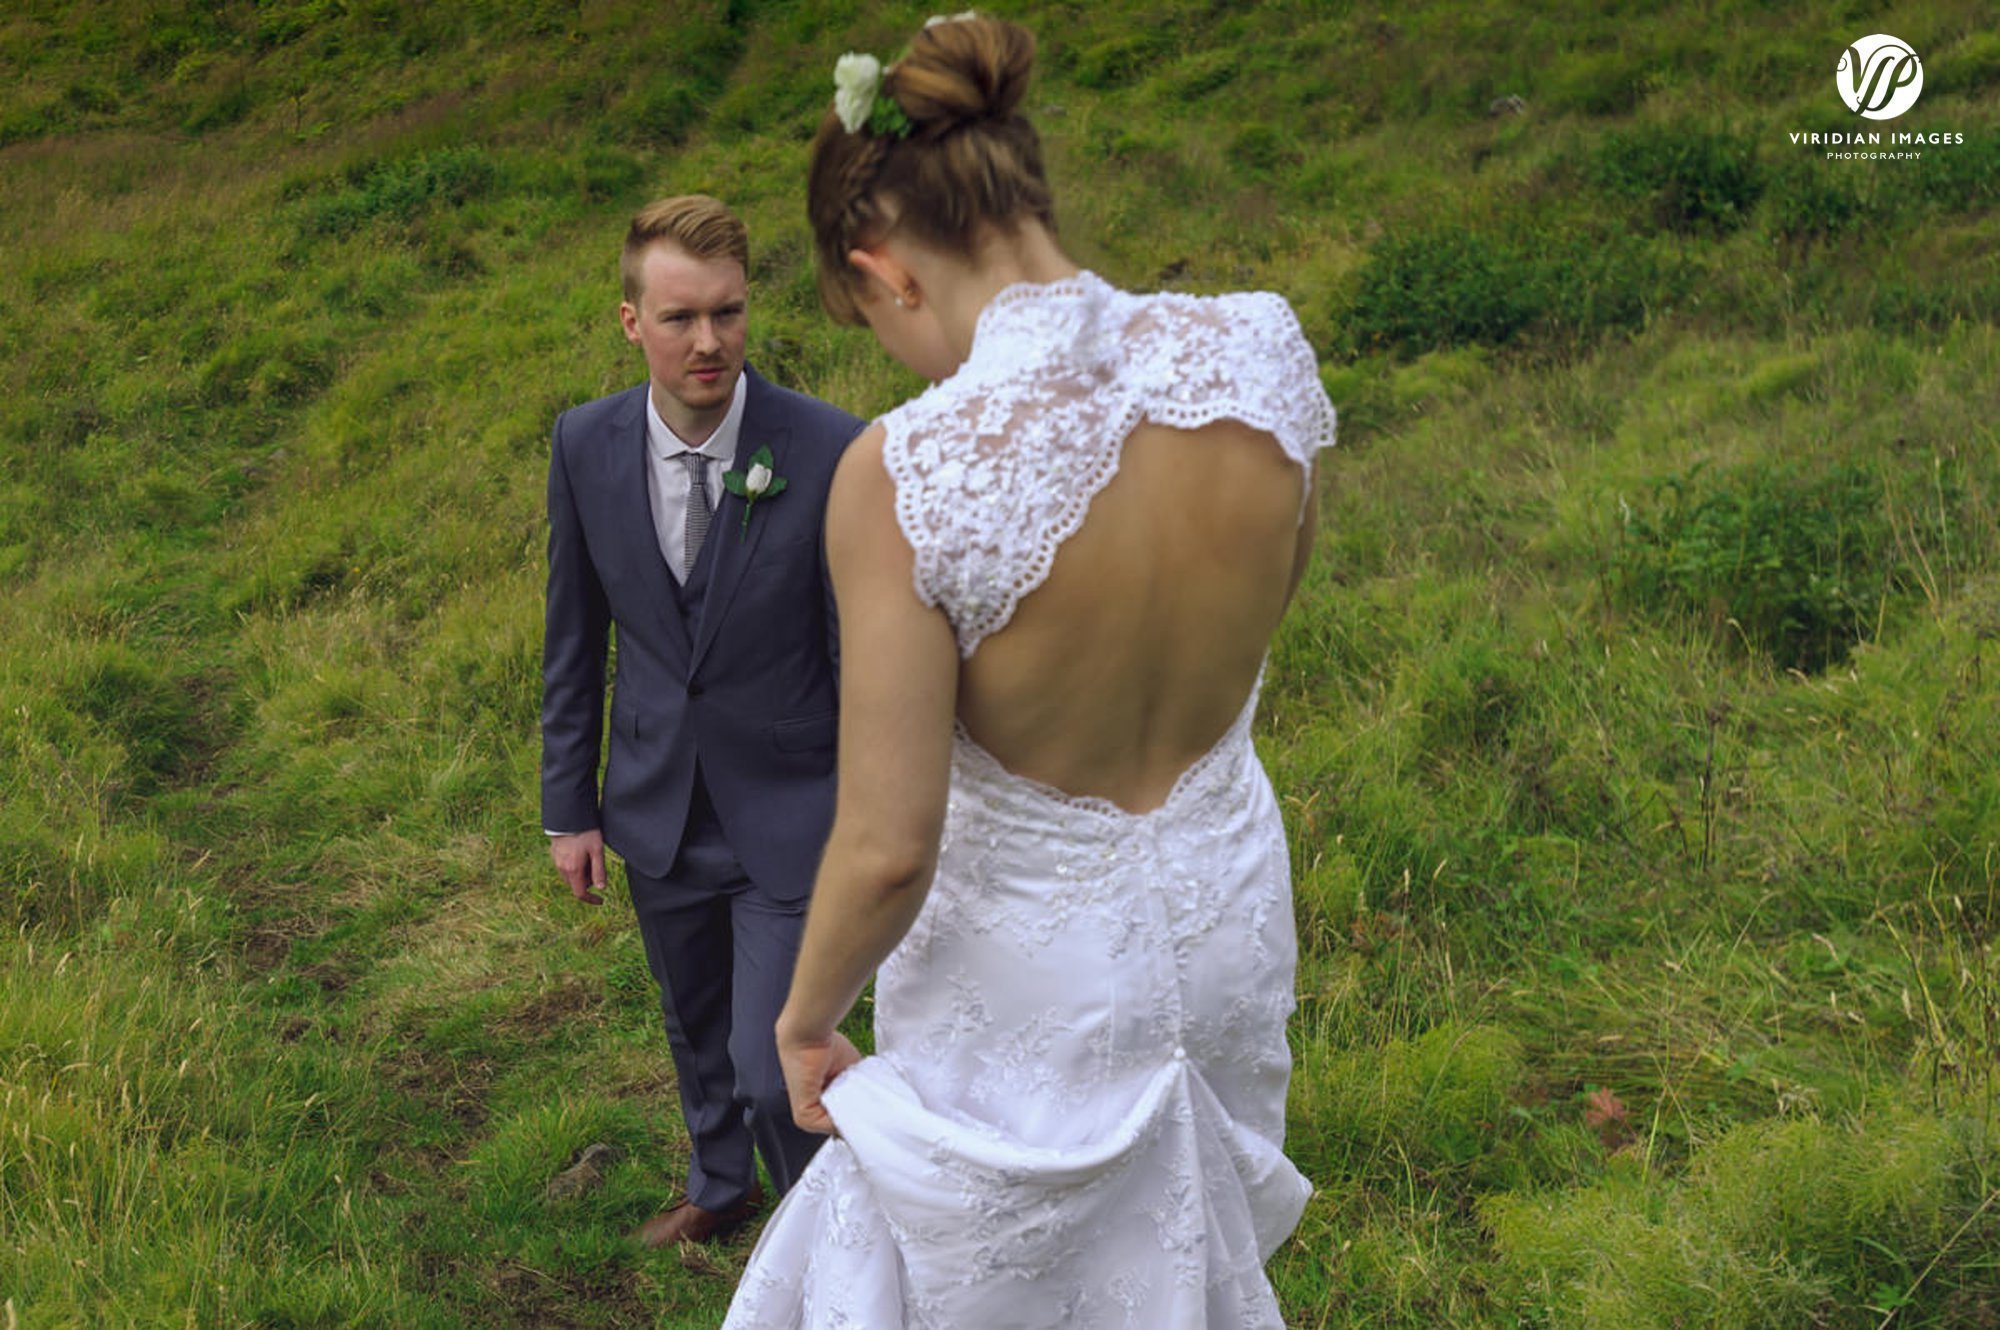 Groom looks emotionally as he helps his new bride down the mountain in Iceland